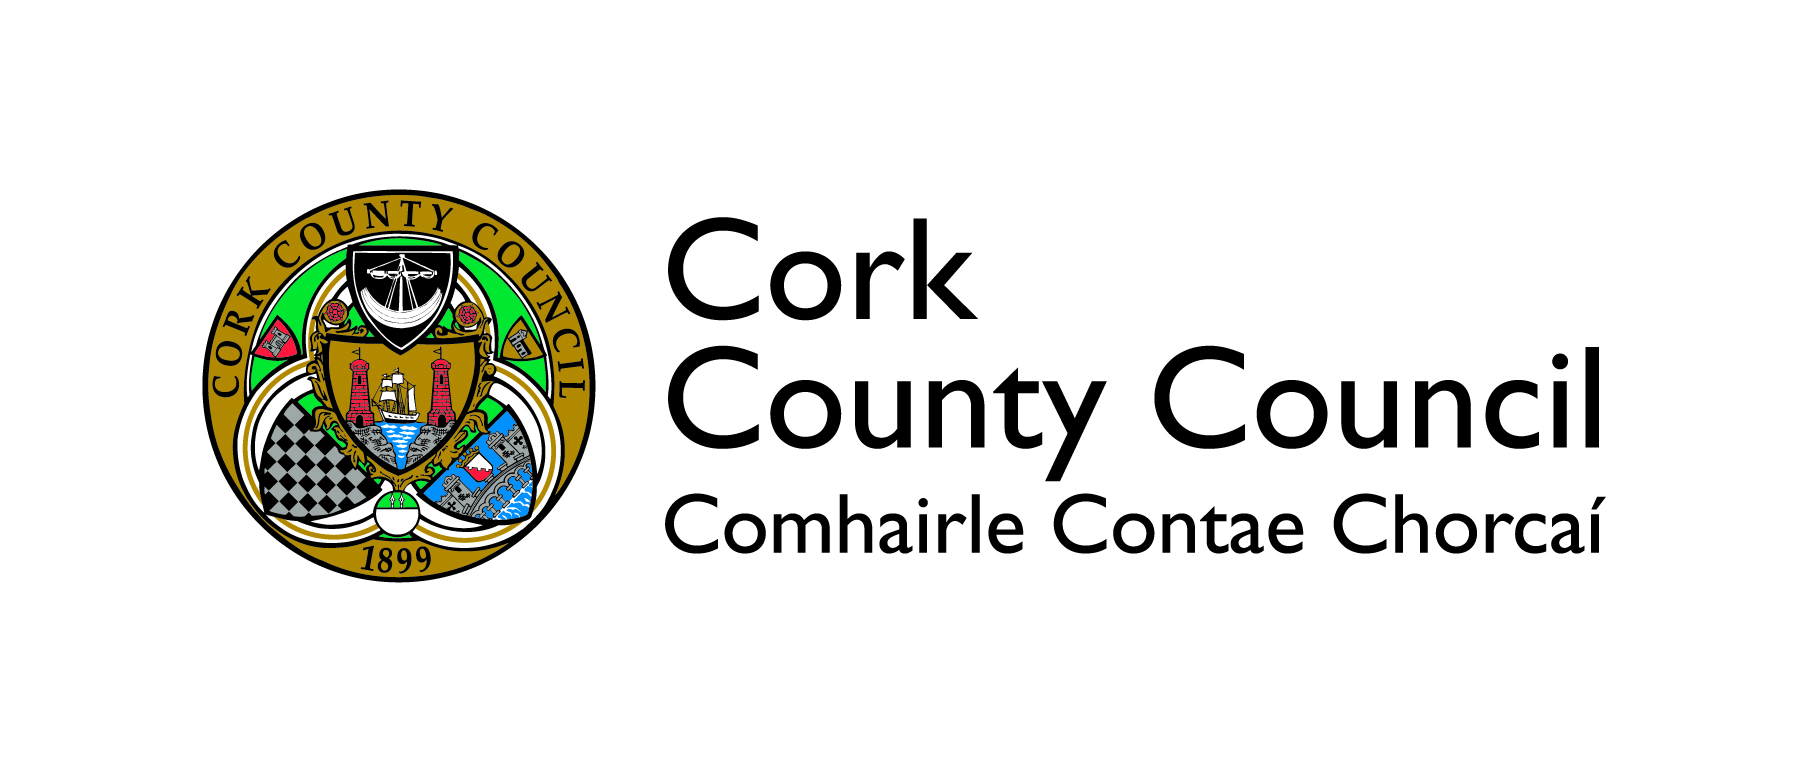 County Mayor awaits response to proposals from Cork City Council